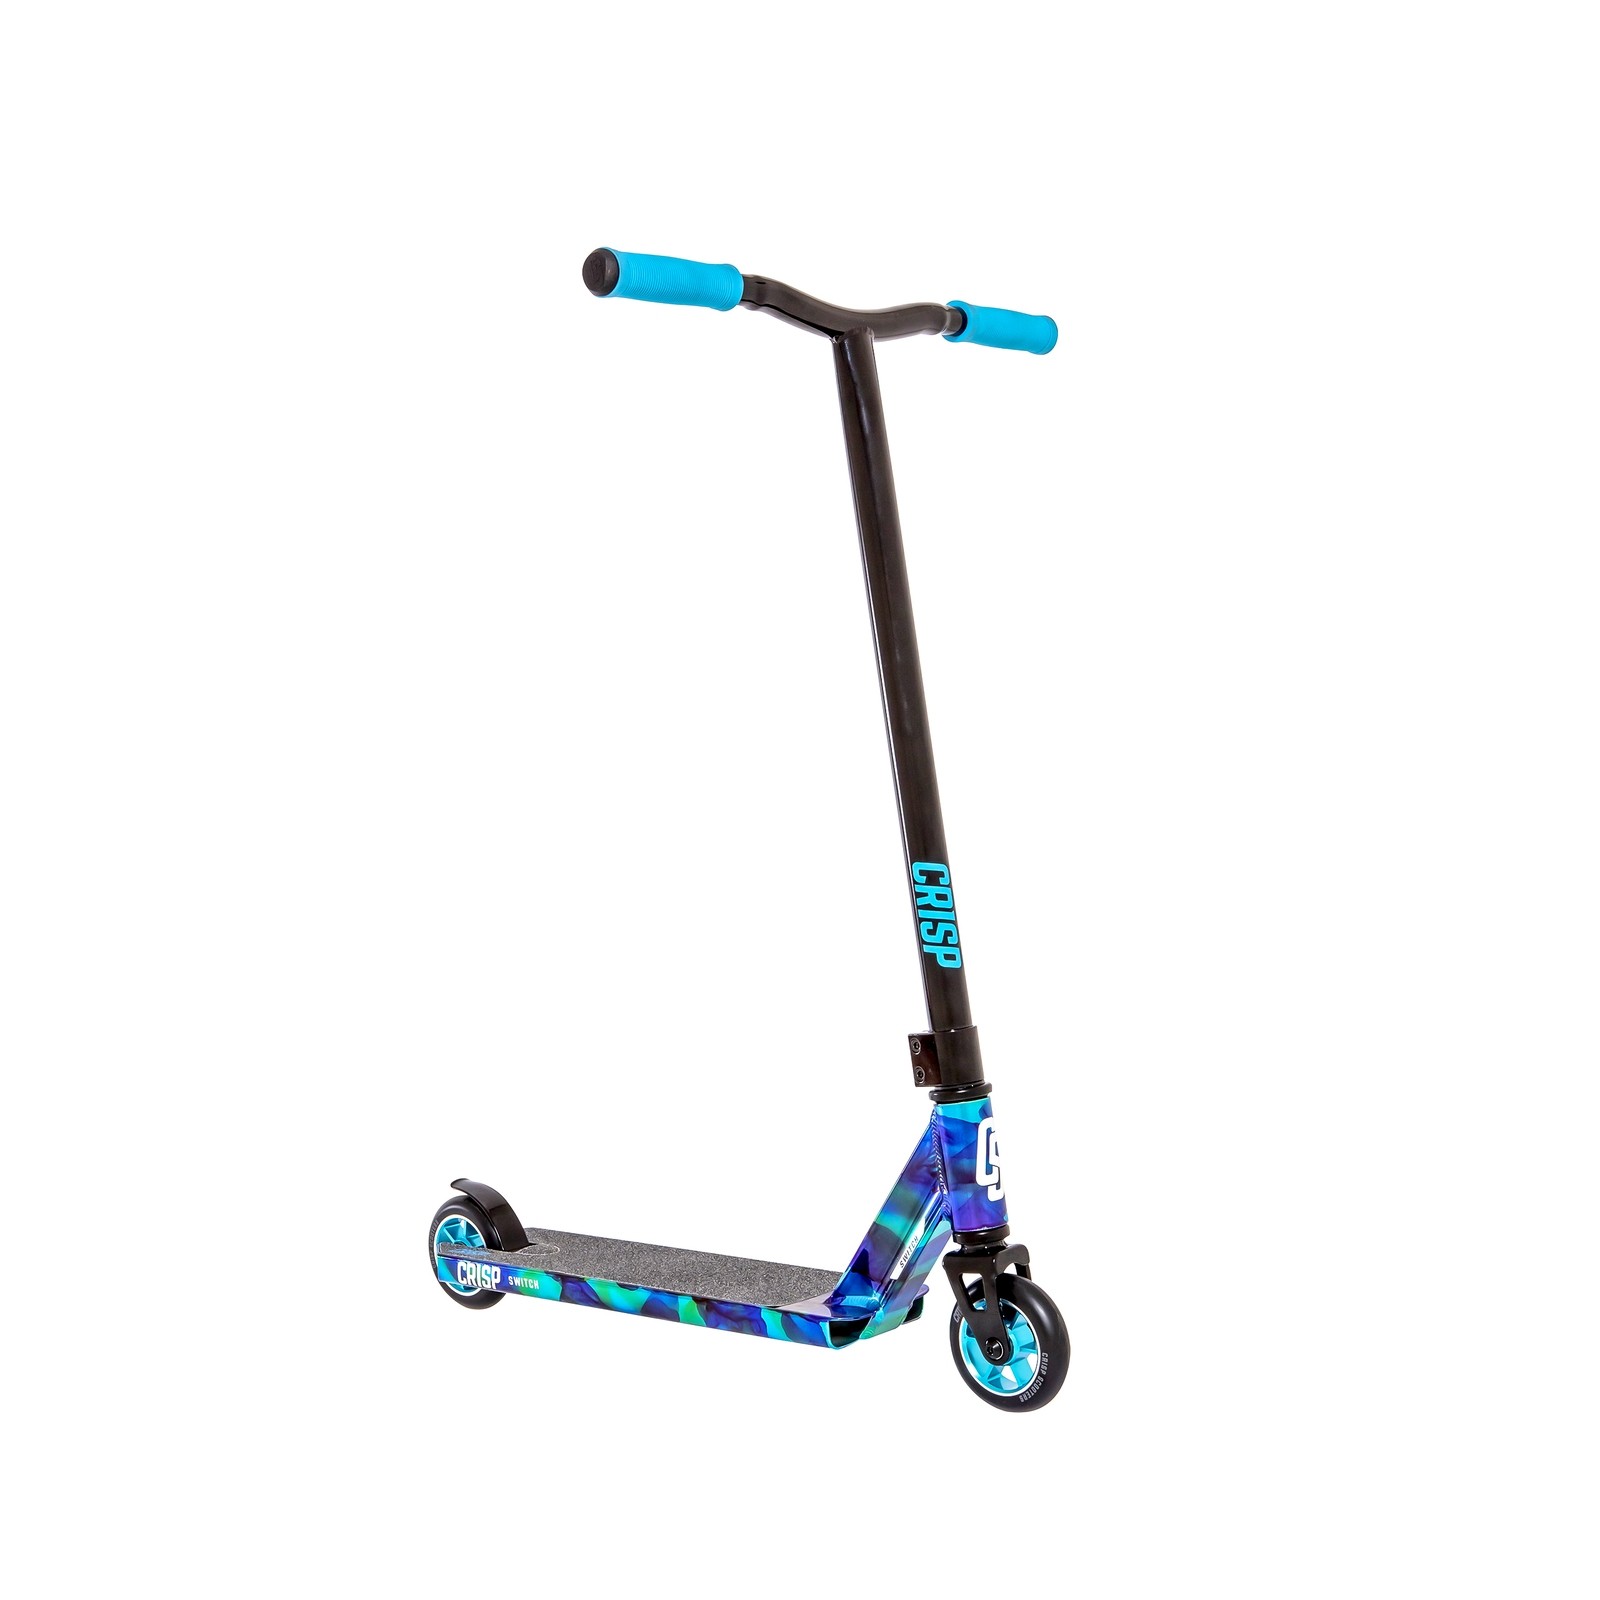 Crisp Switch Scooter